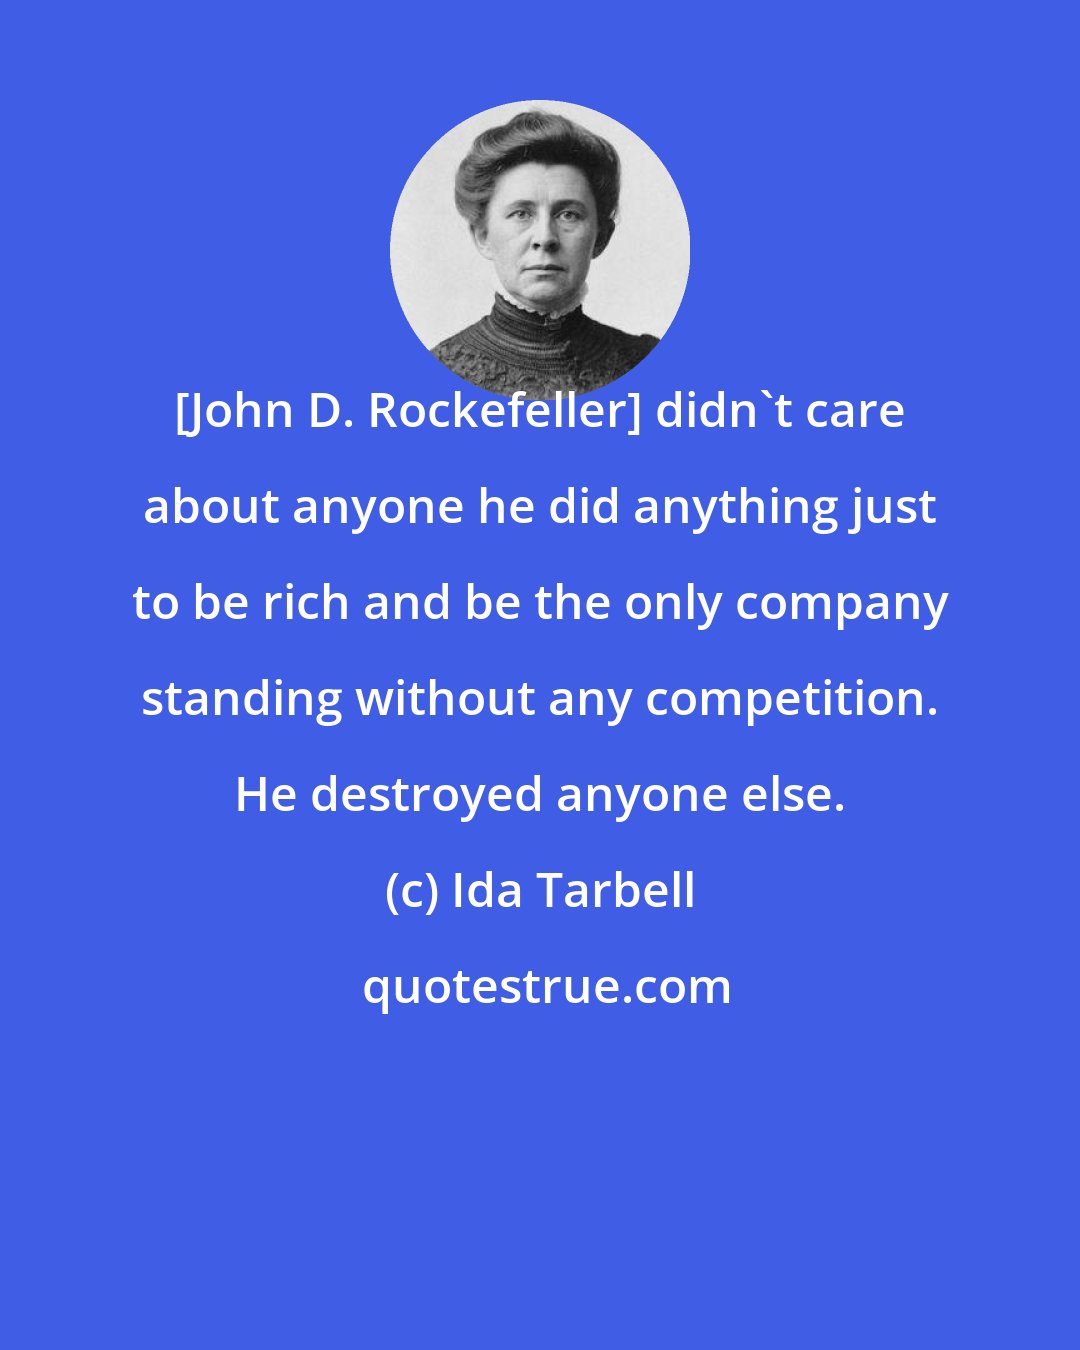 Ida Tarbell: [John D. Rockefeller] didn't care about anyone he did anything just to be rich and be the only company standing without any competition. He destroyed anyone else.